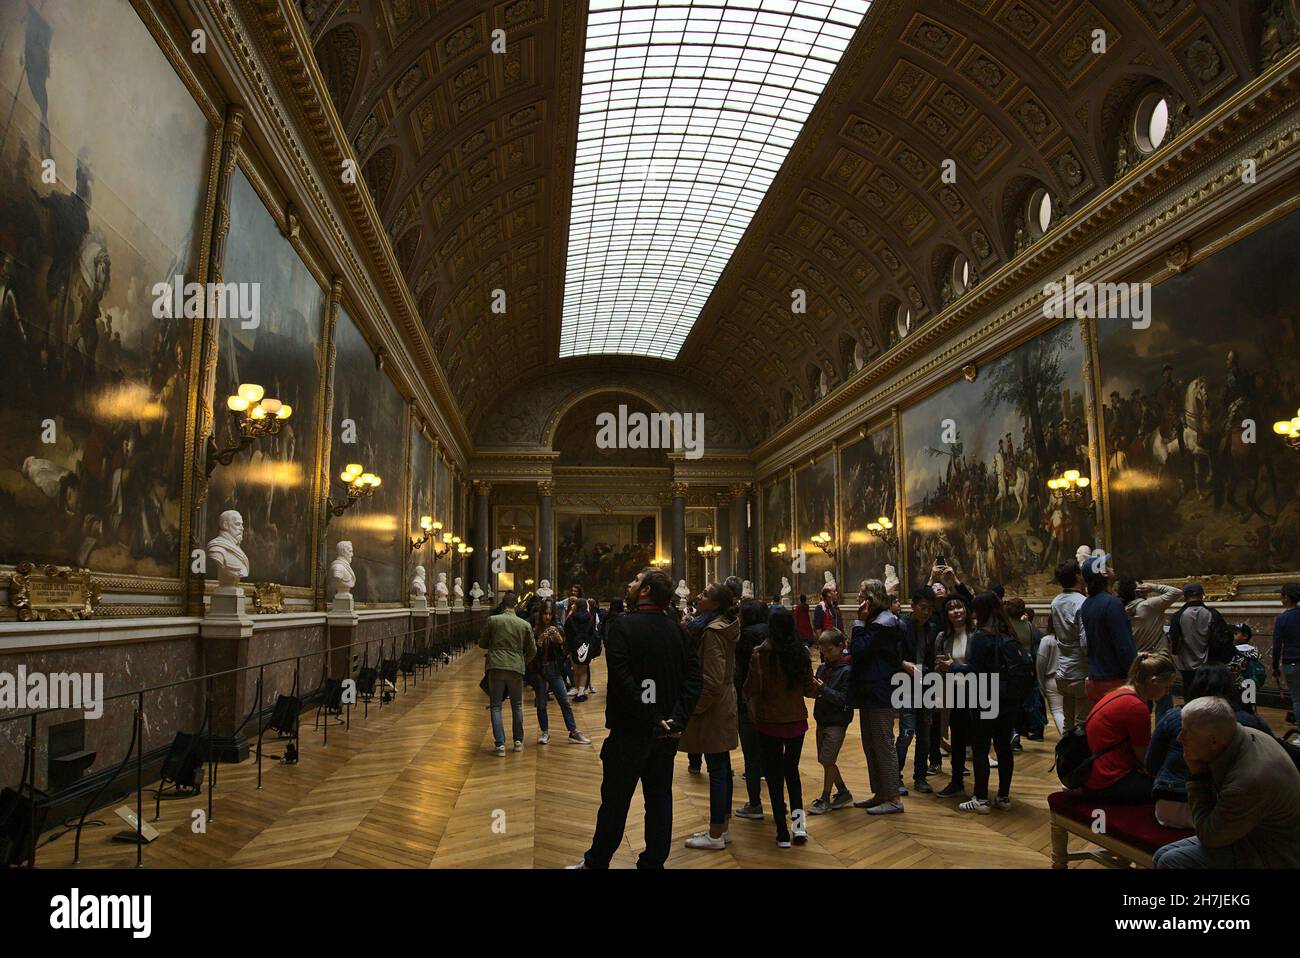 PARIS, FRANCE - Oct 01, 2019: The tourists walking around Gallery of Great Battles in Palace of Versailles at Paris, France Stock Photo